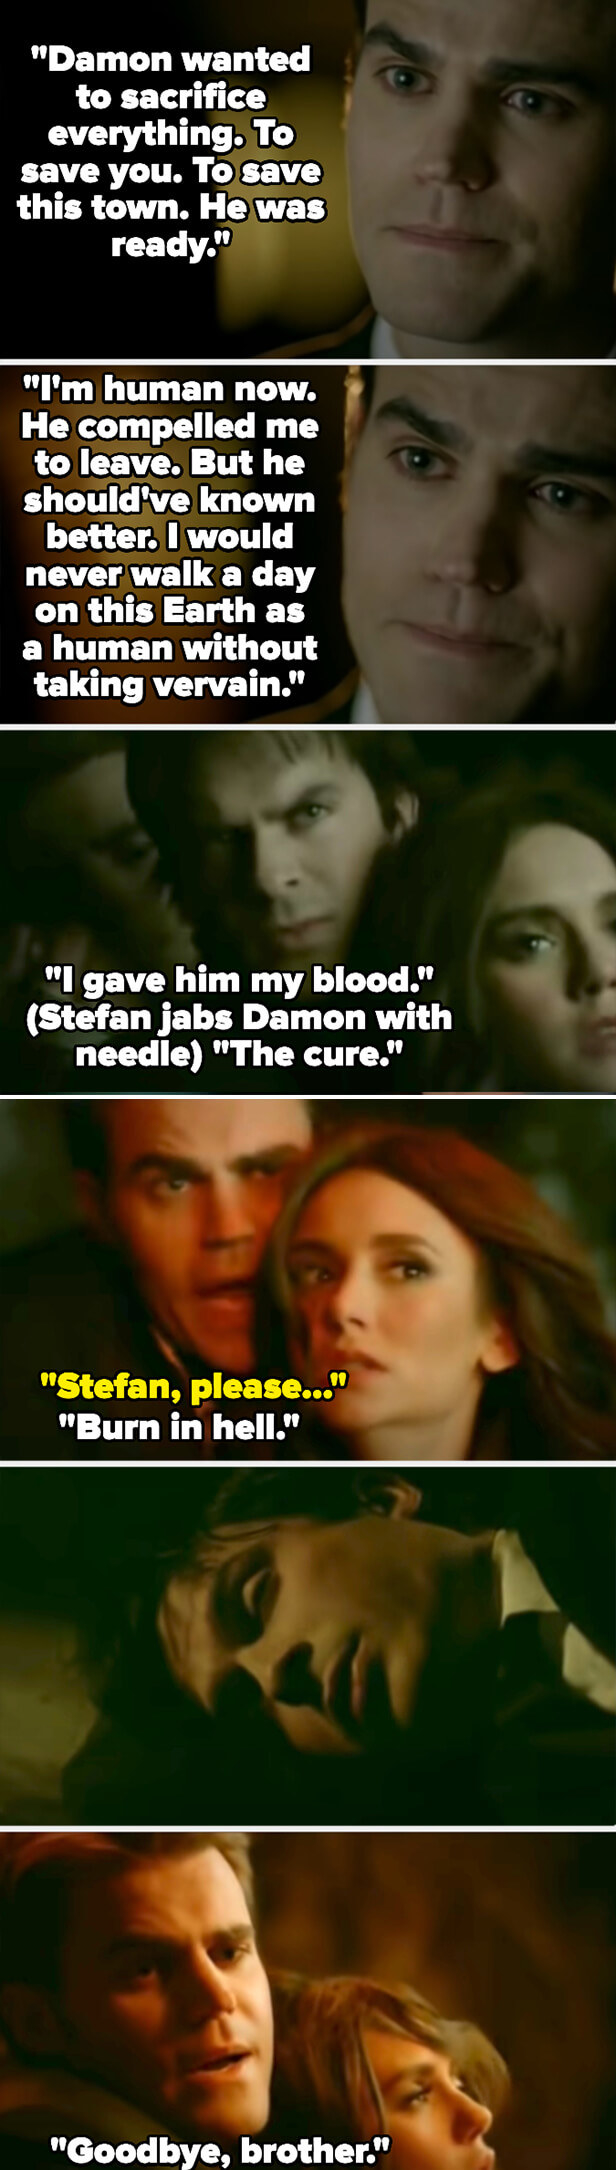 Stefan says he&#x27;d never walk a day on Earth as a human without taking vervain